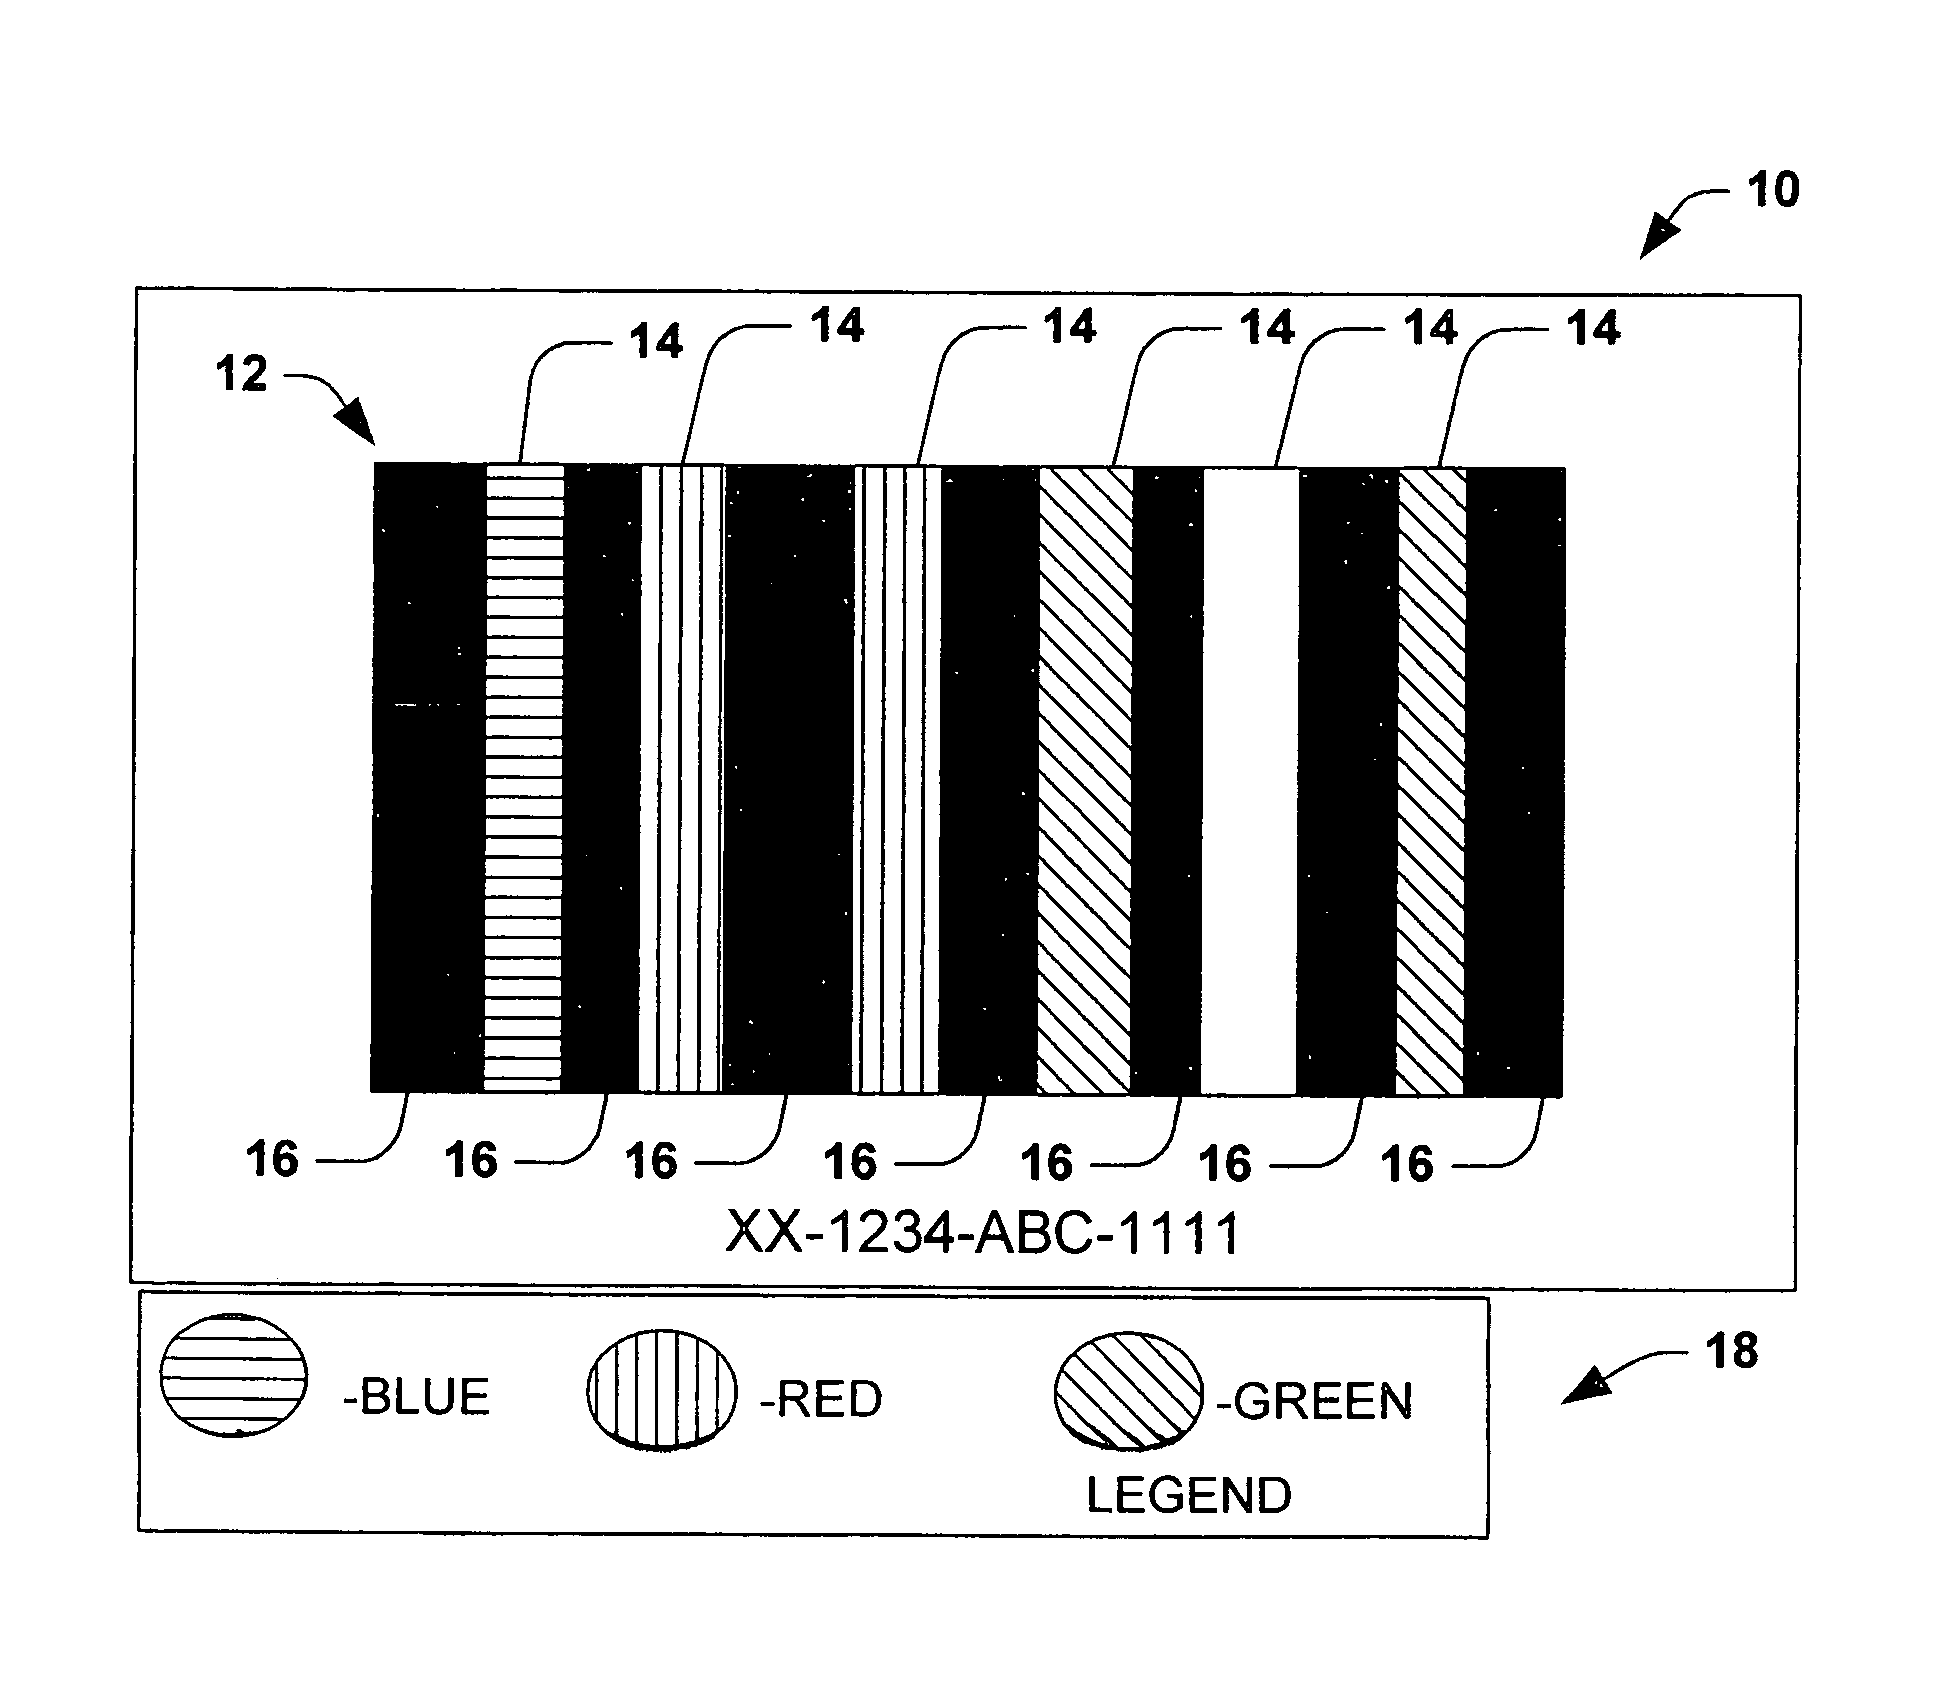 Bar code and method of forming a bar code having color for encoding supplemental information